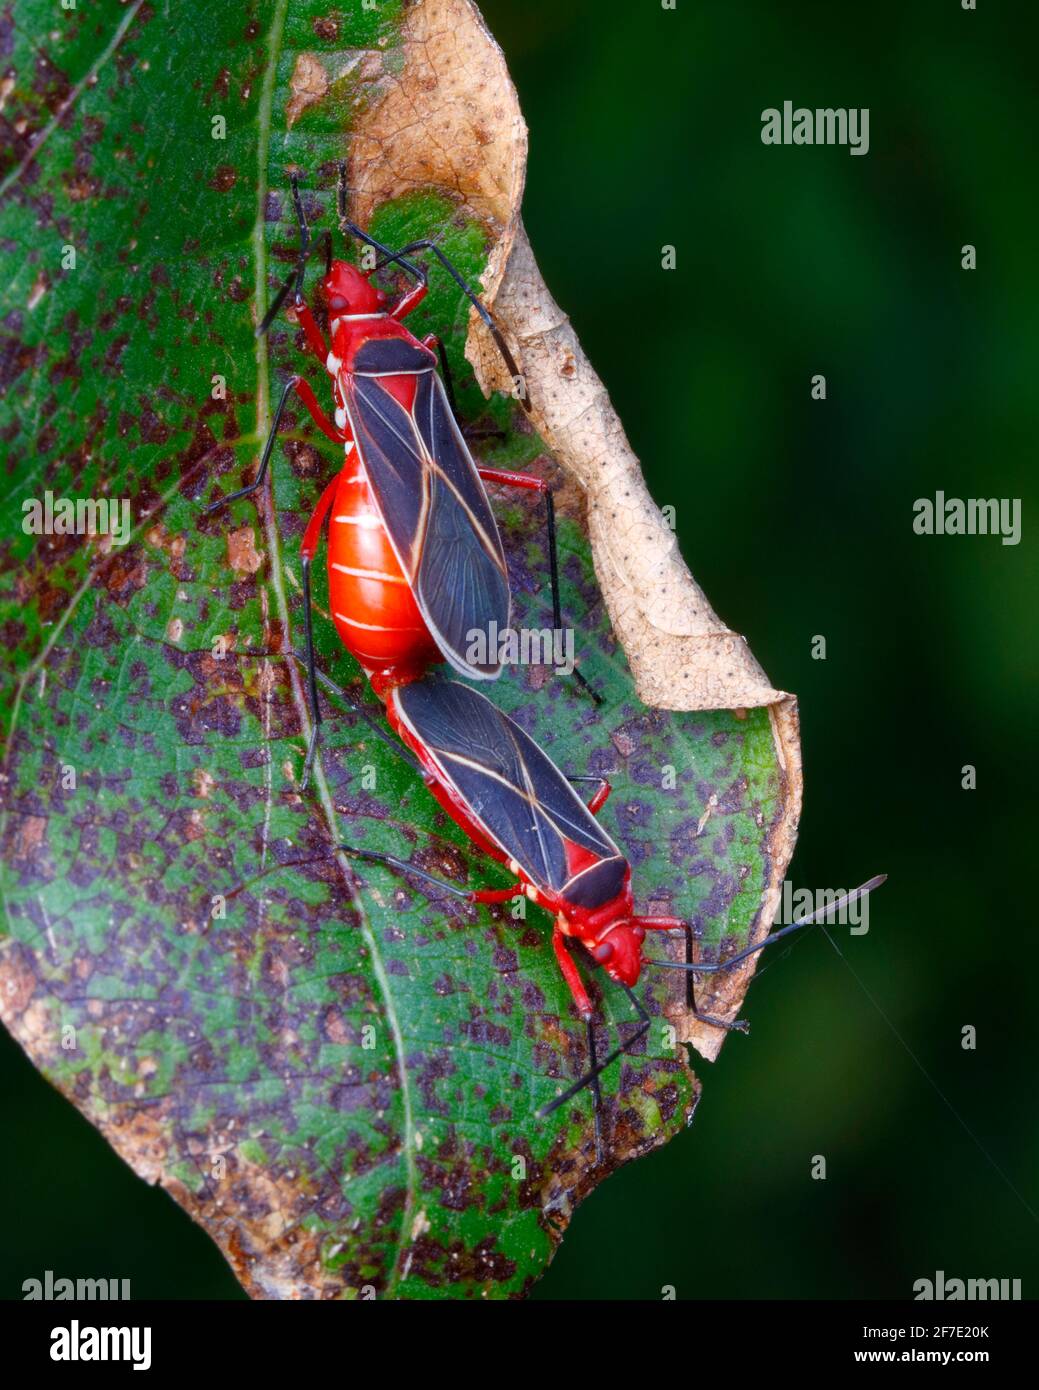 Mating adult cotton stainers, Dysdercus suturellus, on a cotton leaf. Stock Photo